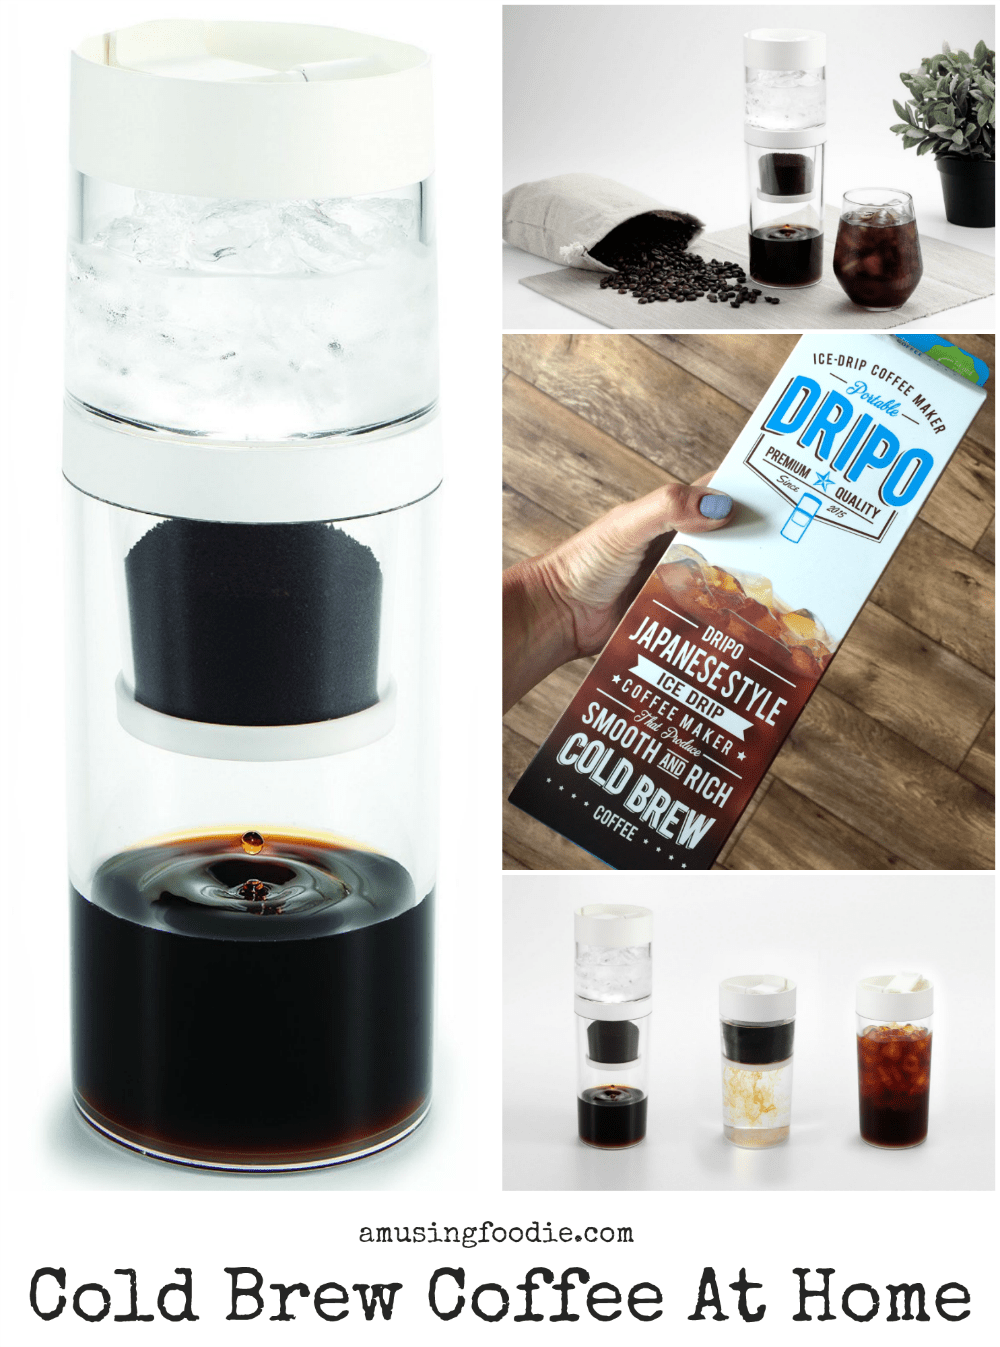 Cold brew coffee at home with Dripo!